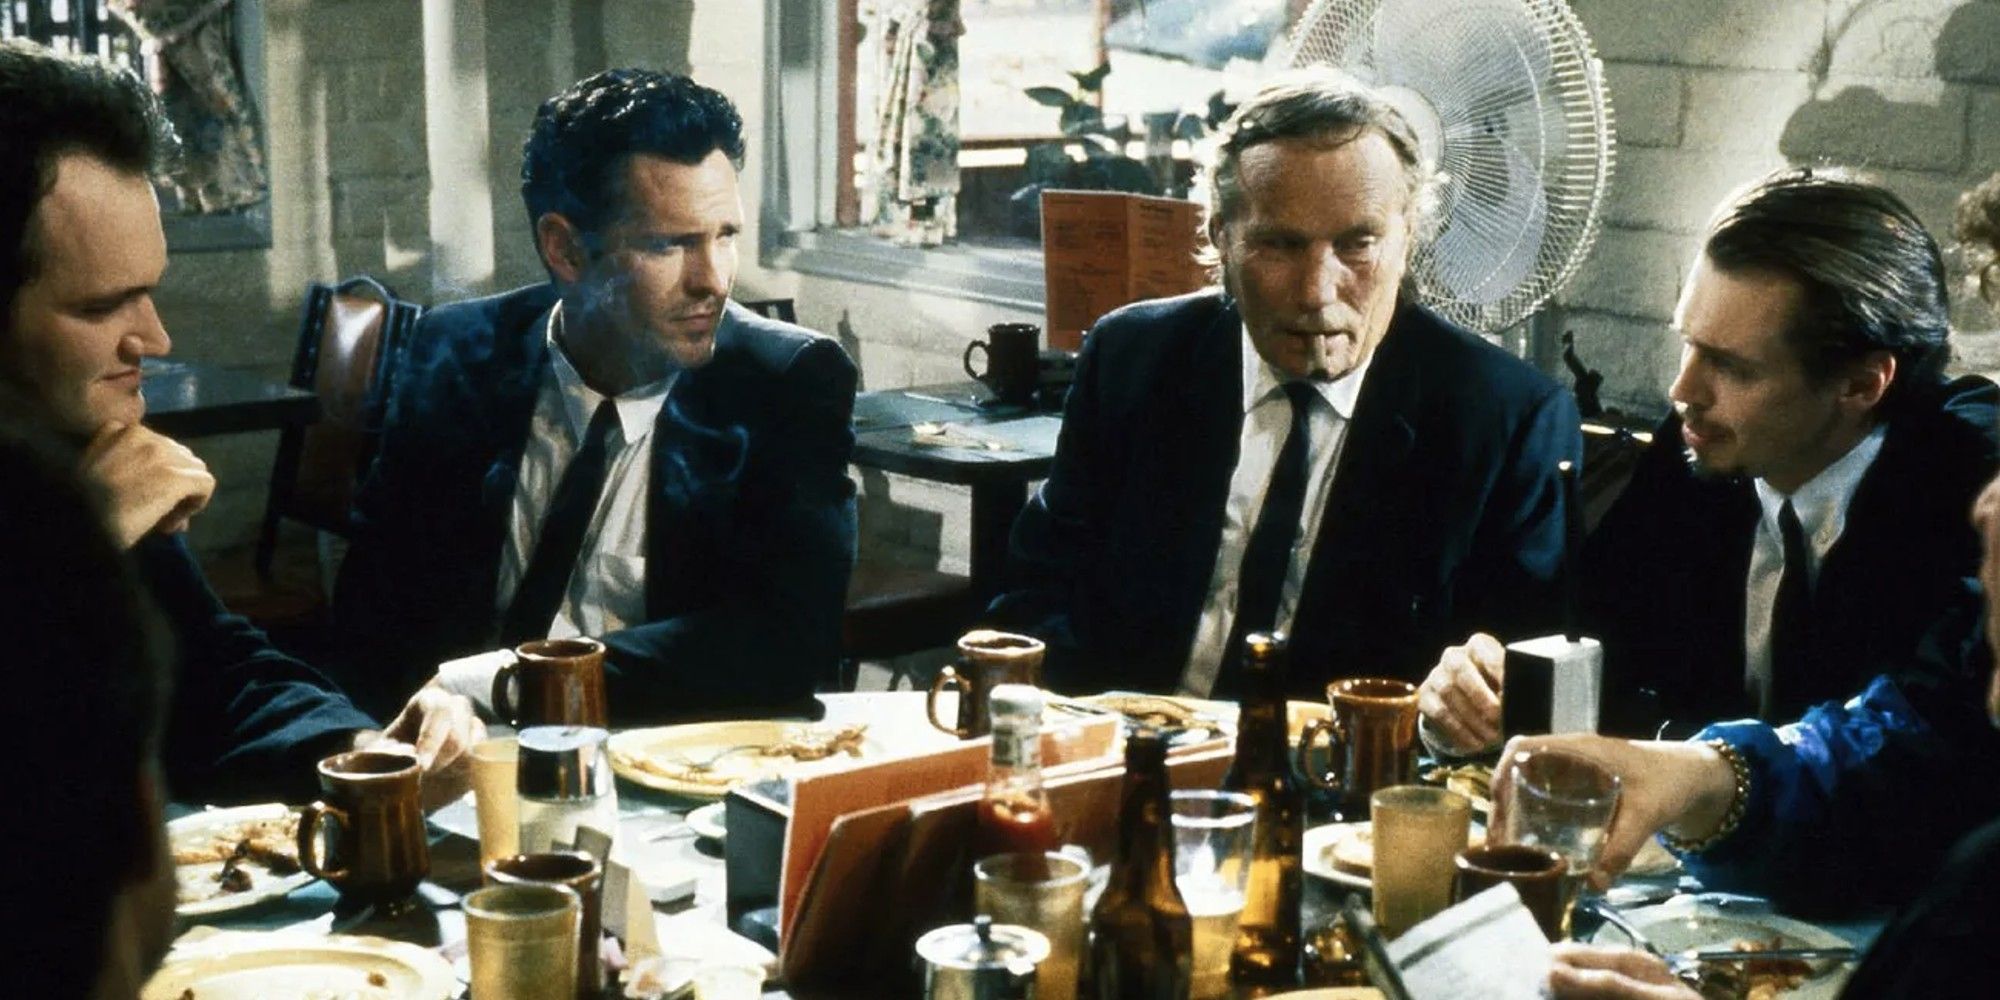 Steve Buscemi, Quentin Tarantino, Michael Madsen, Edward Bunker, and Lawrence Tierney in Reservoir Dogs (1992)